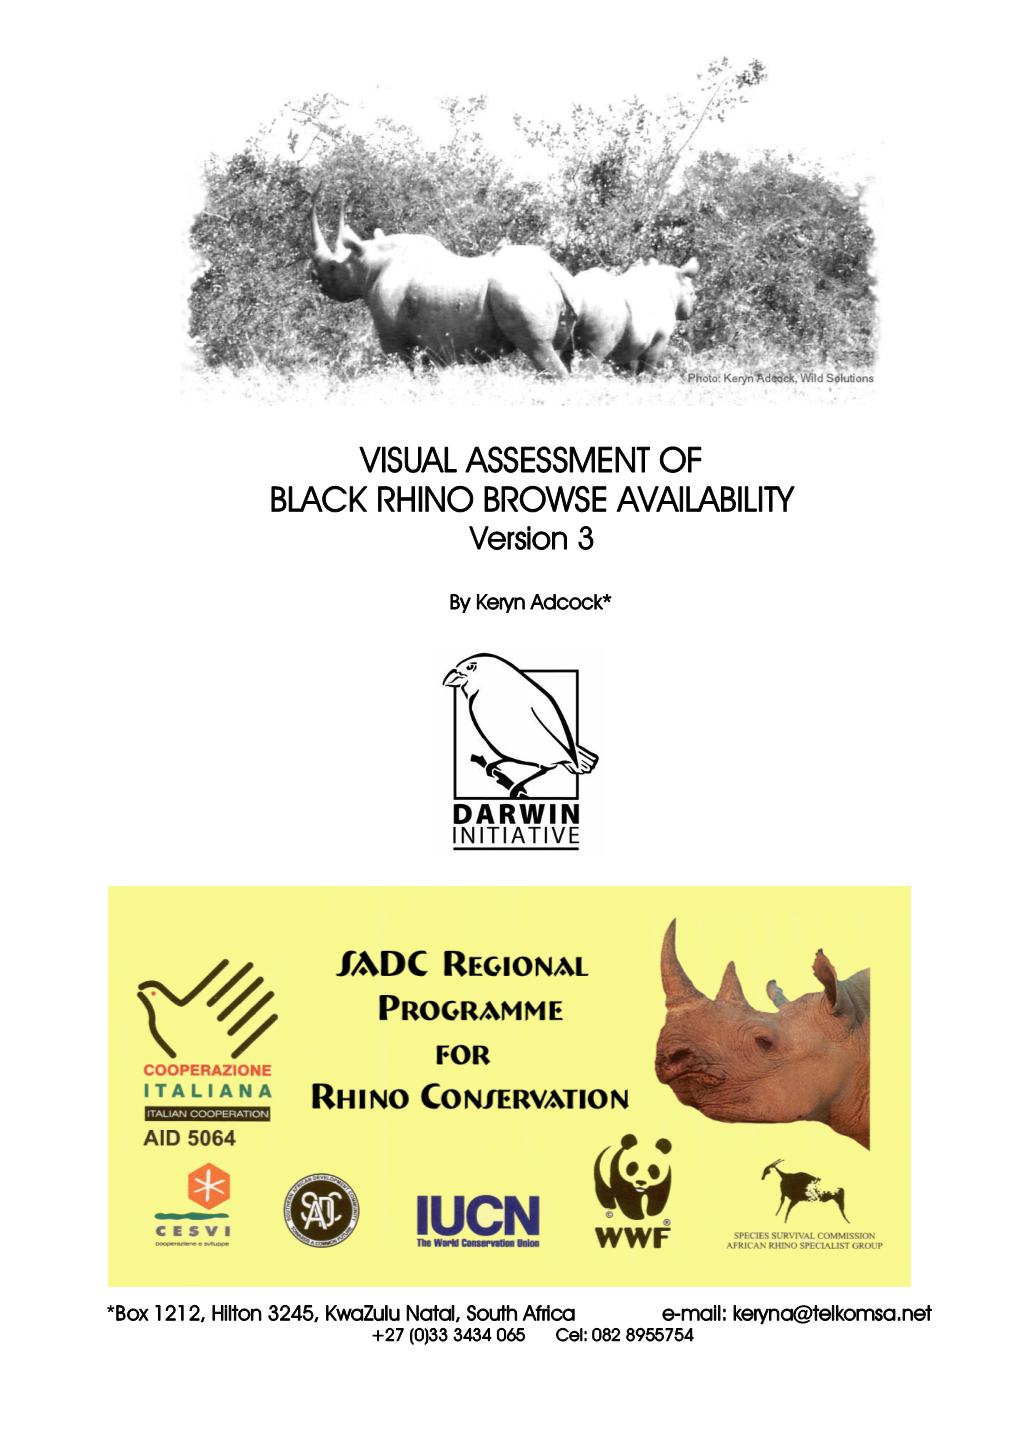 VISUAL ASSESSMENT of BLACK RHINO BROWSE AVAILABILITY Version 3